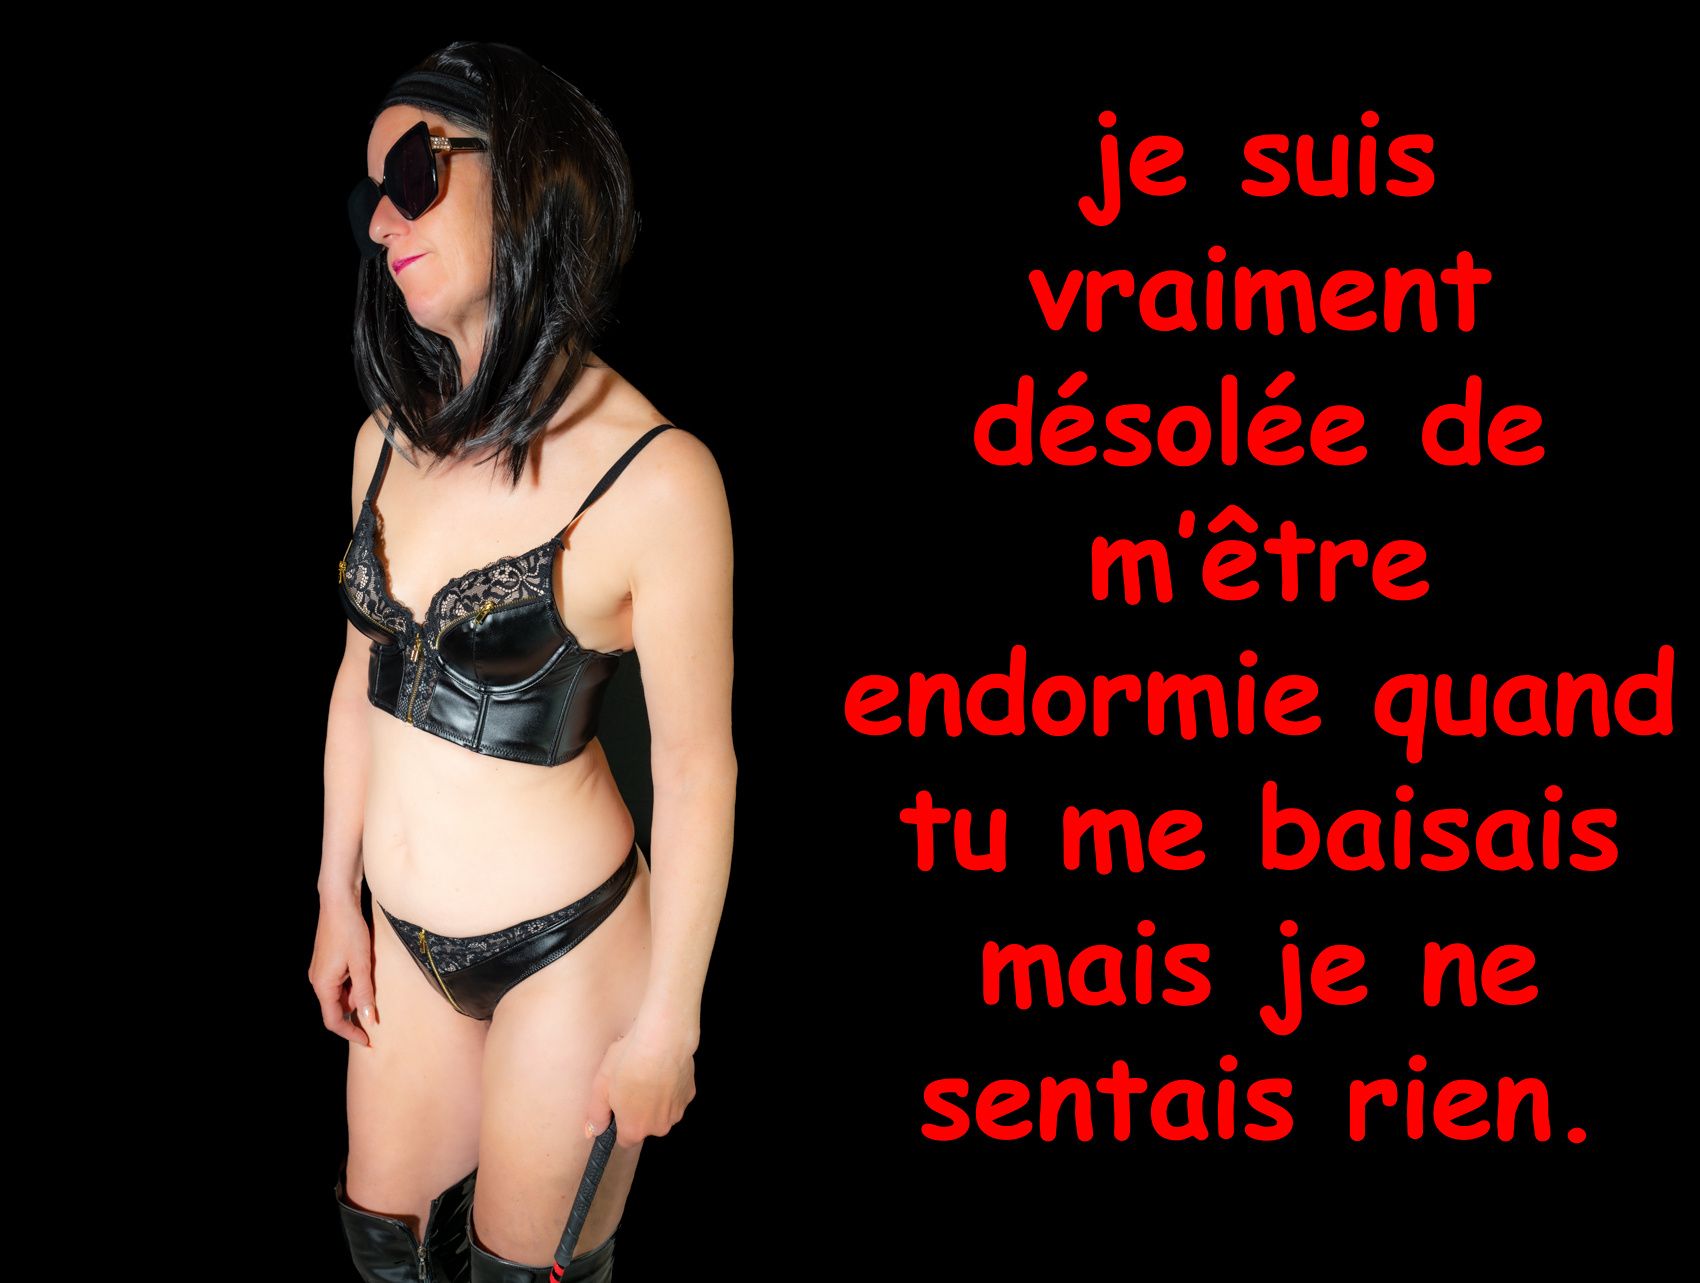 captions about chastity and femdom 450-550 #58